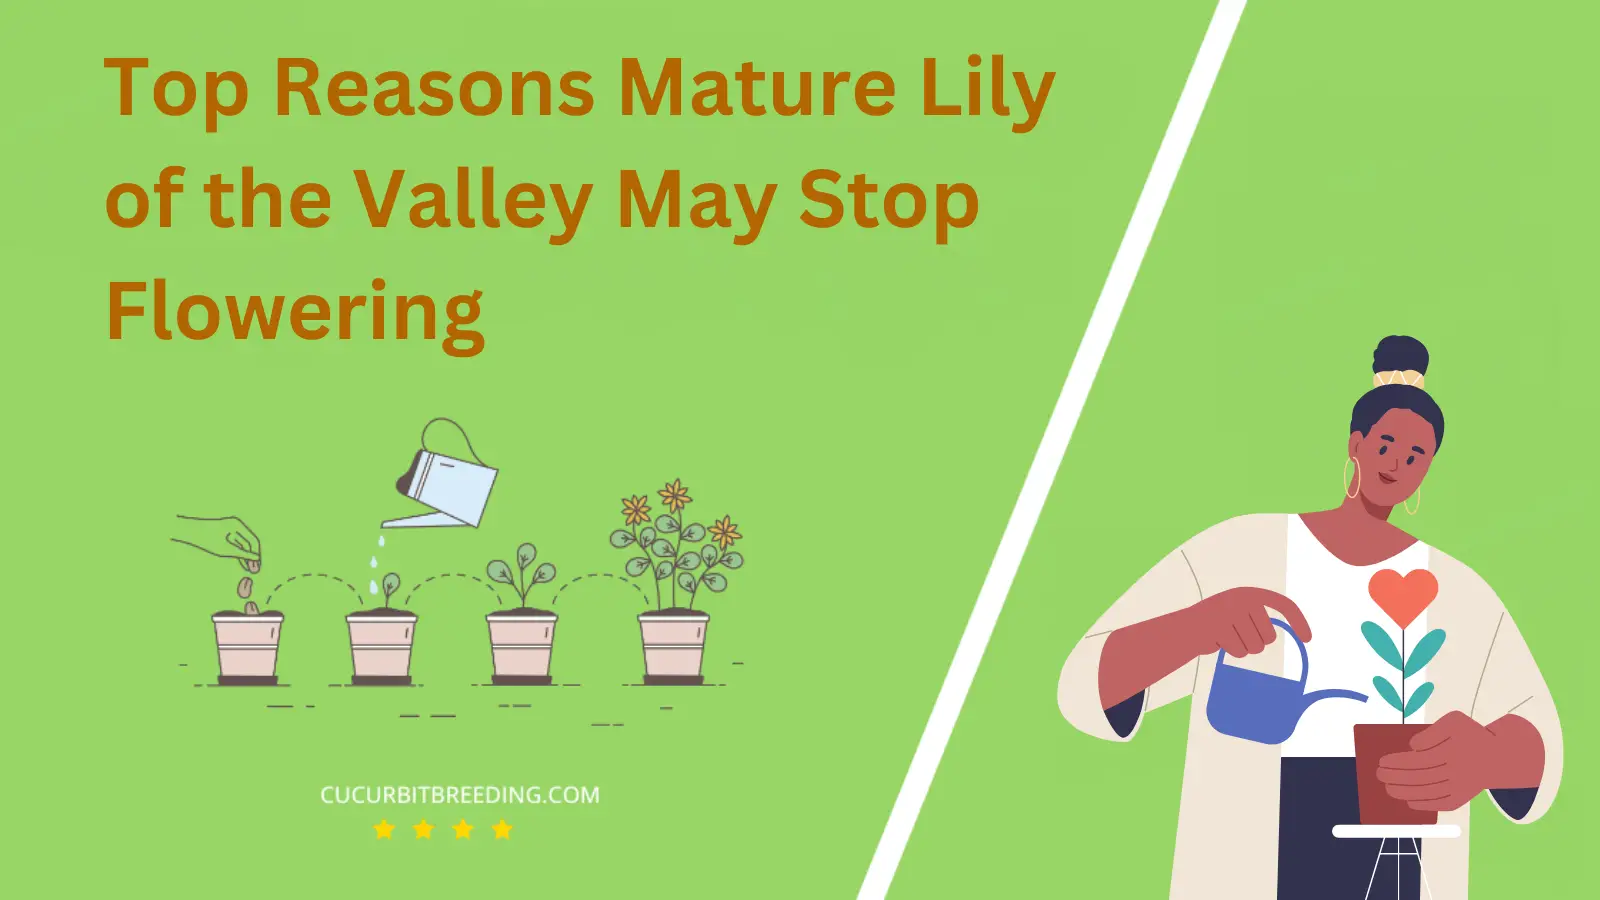 Top Reasons Mature Lily of the Valley May Stop Flowering